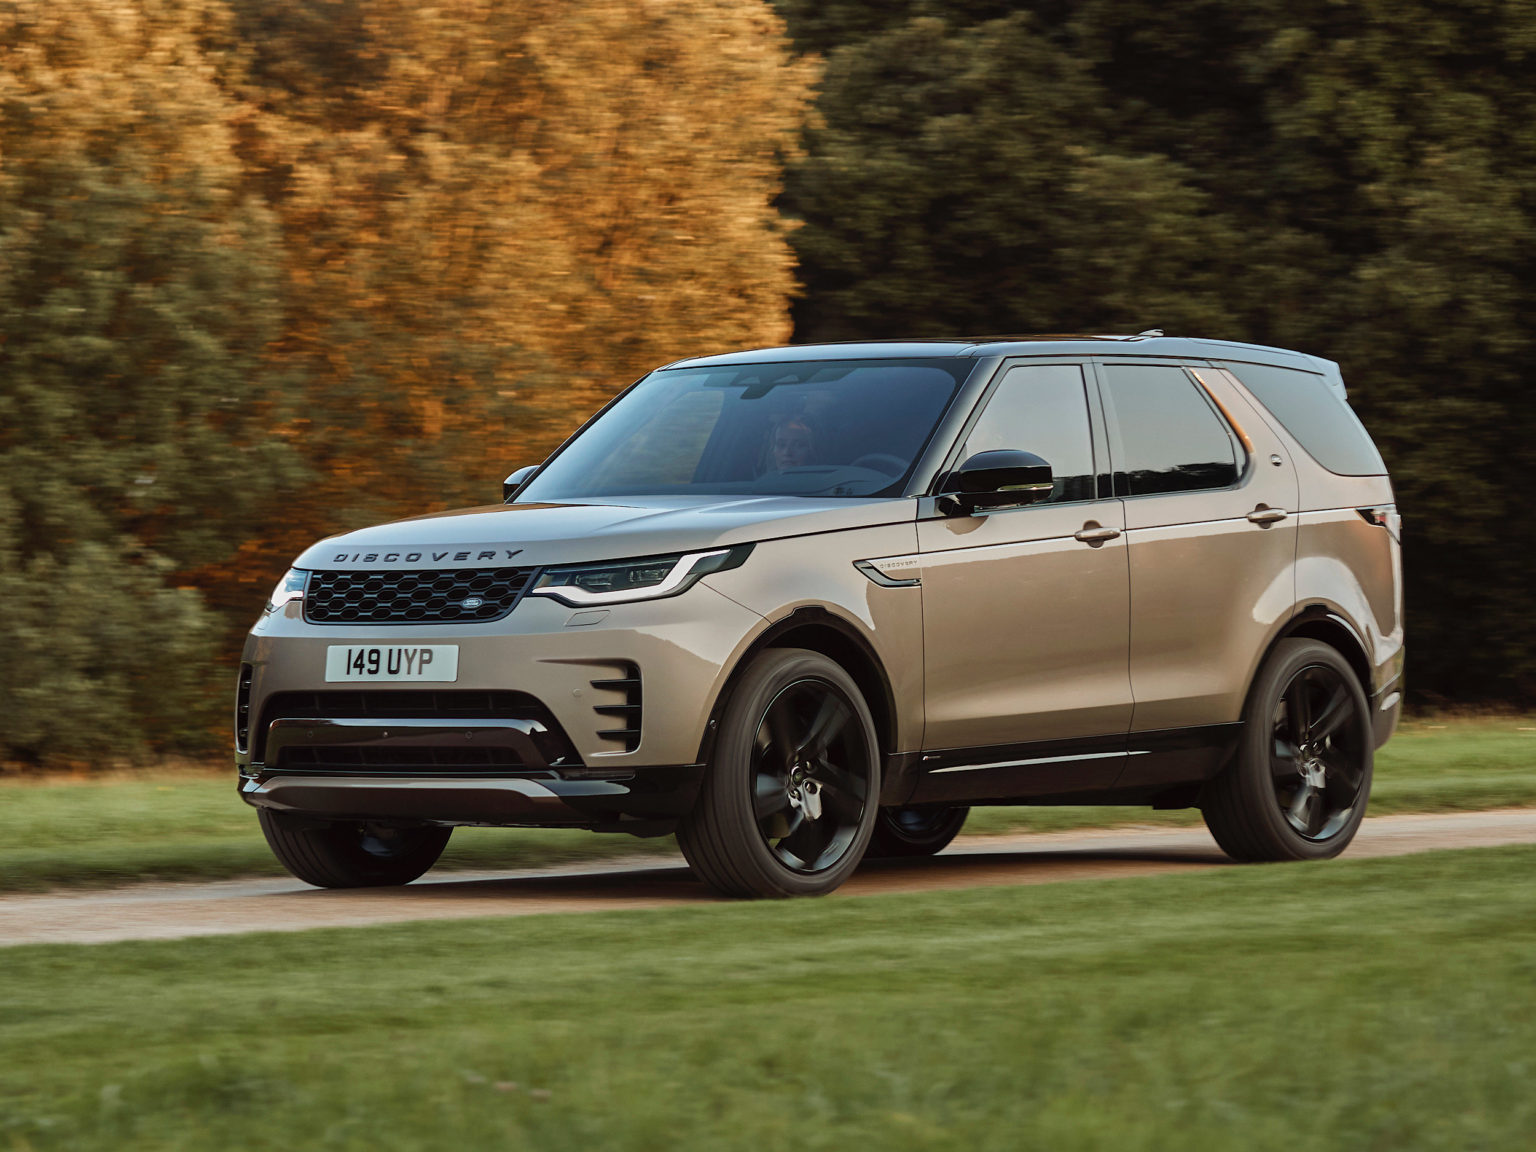 The Land Rover Discovery has been giving a thorough refresh for the 2021 model year